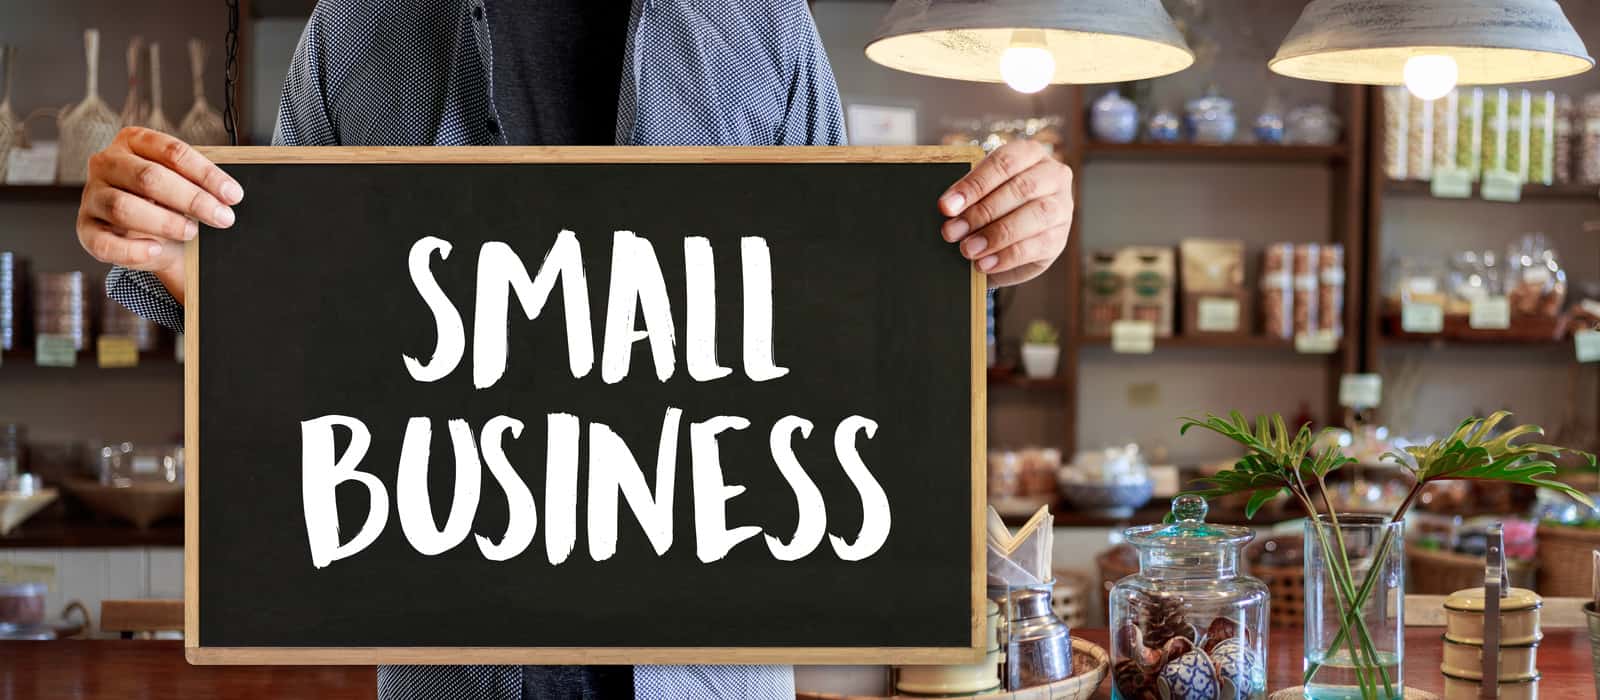 Keys to Small Business